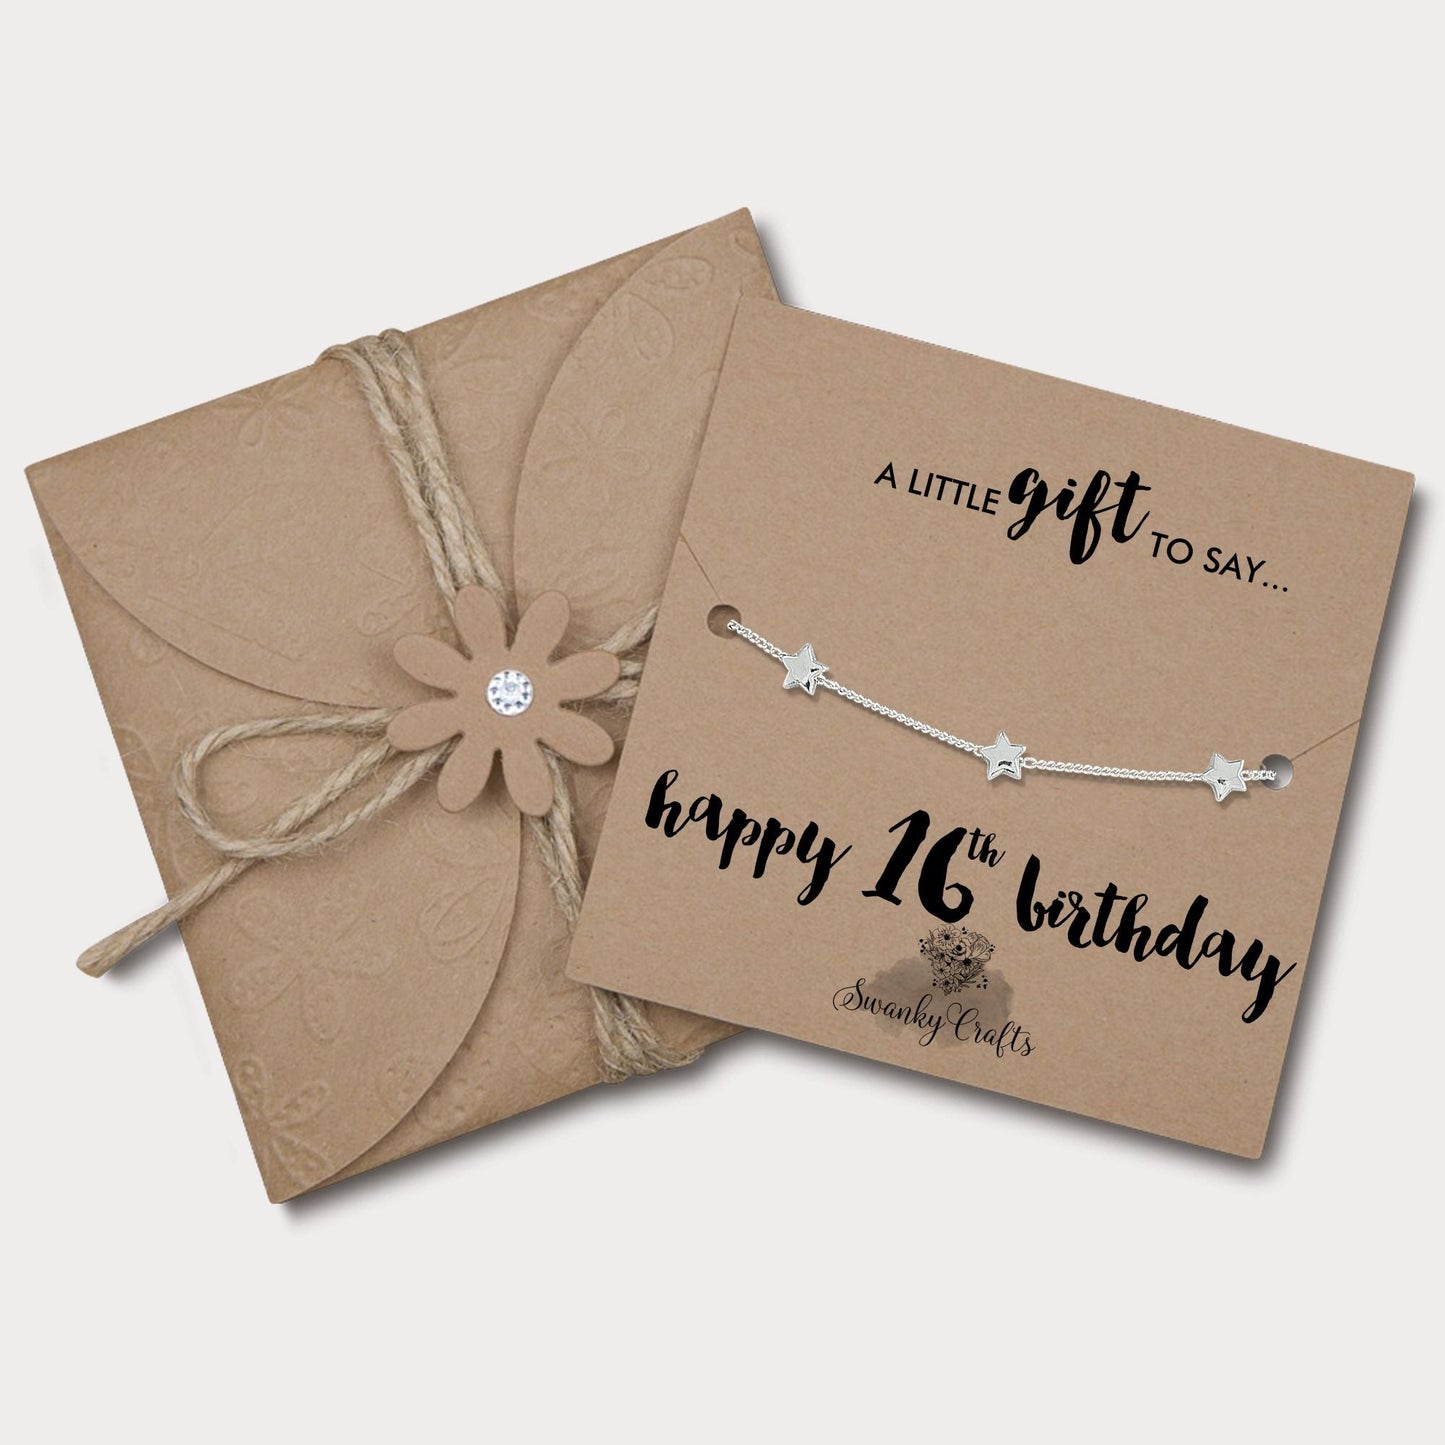 21st Birthday Gift - 925 Silver Star Bracelet with Card and Gift Wrap